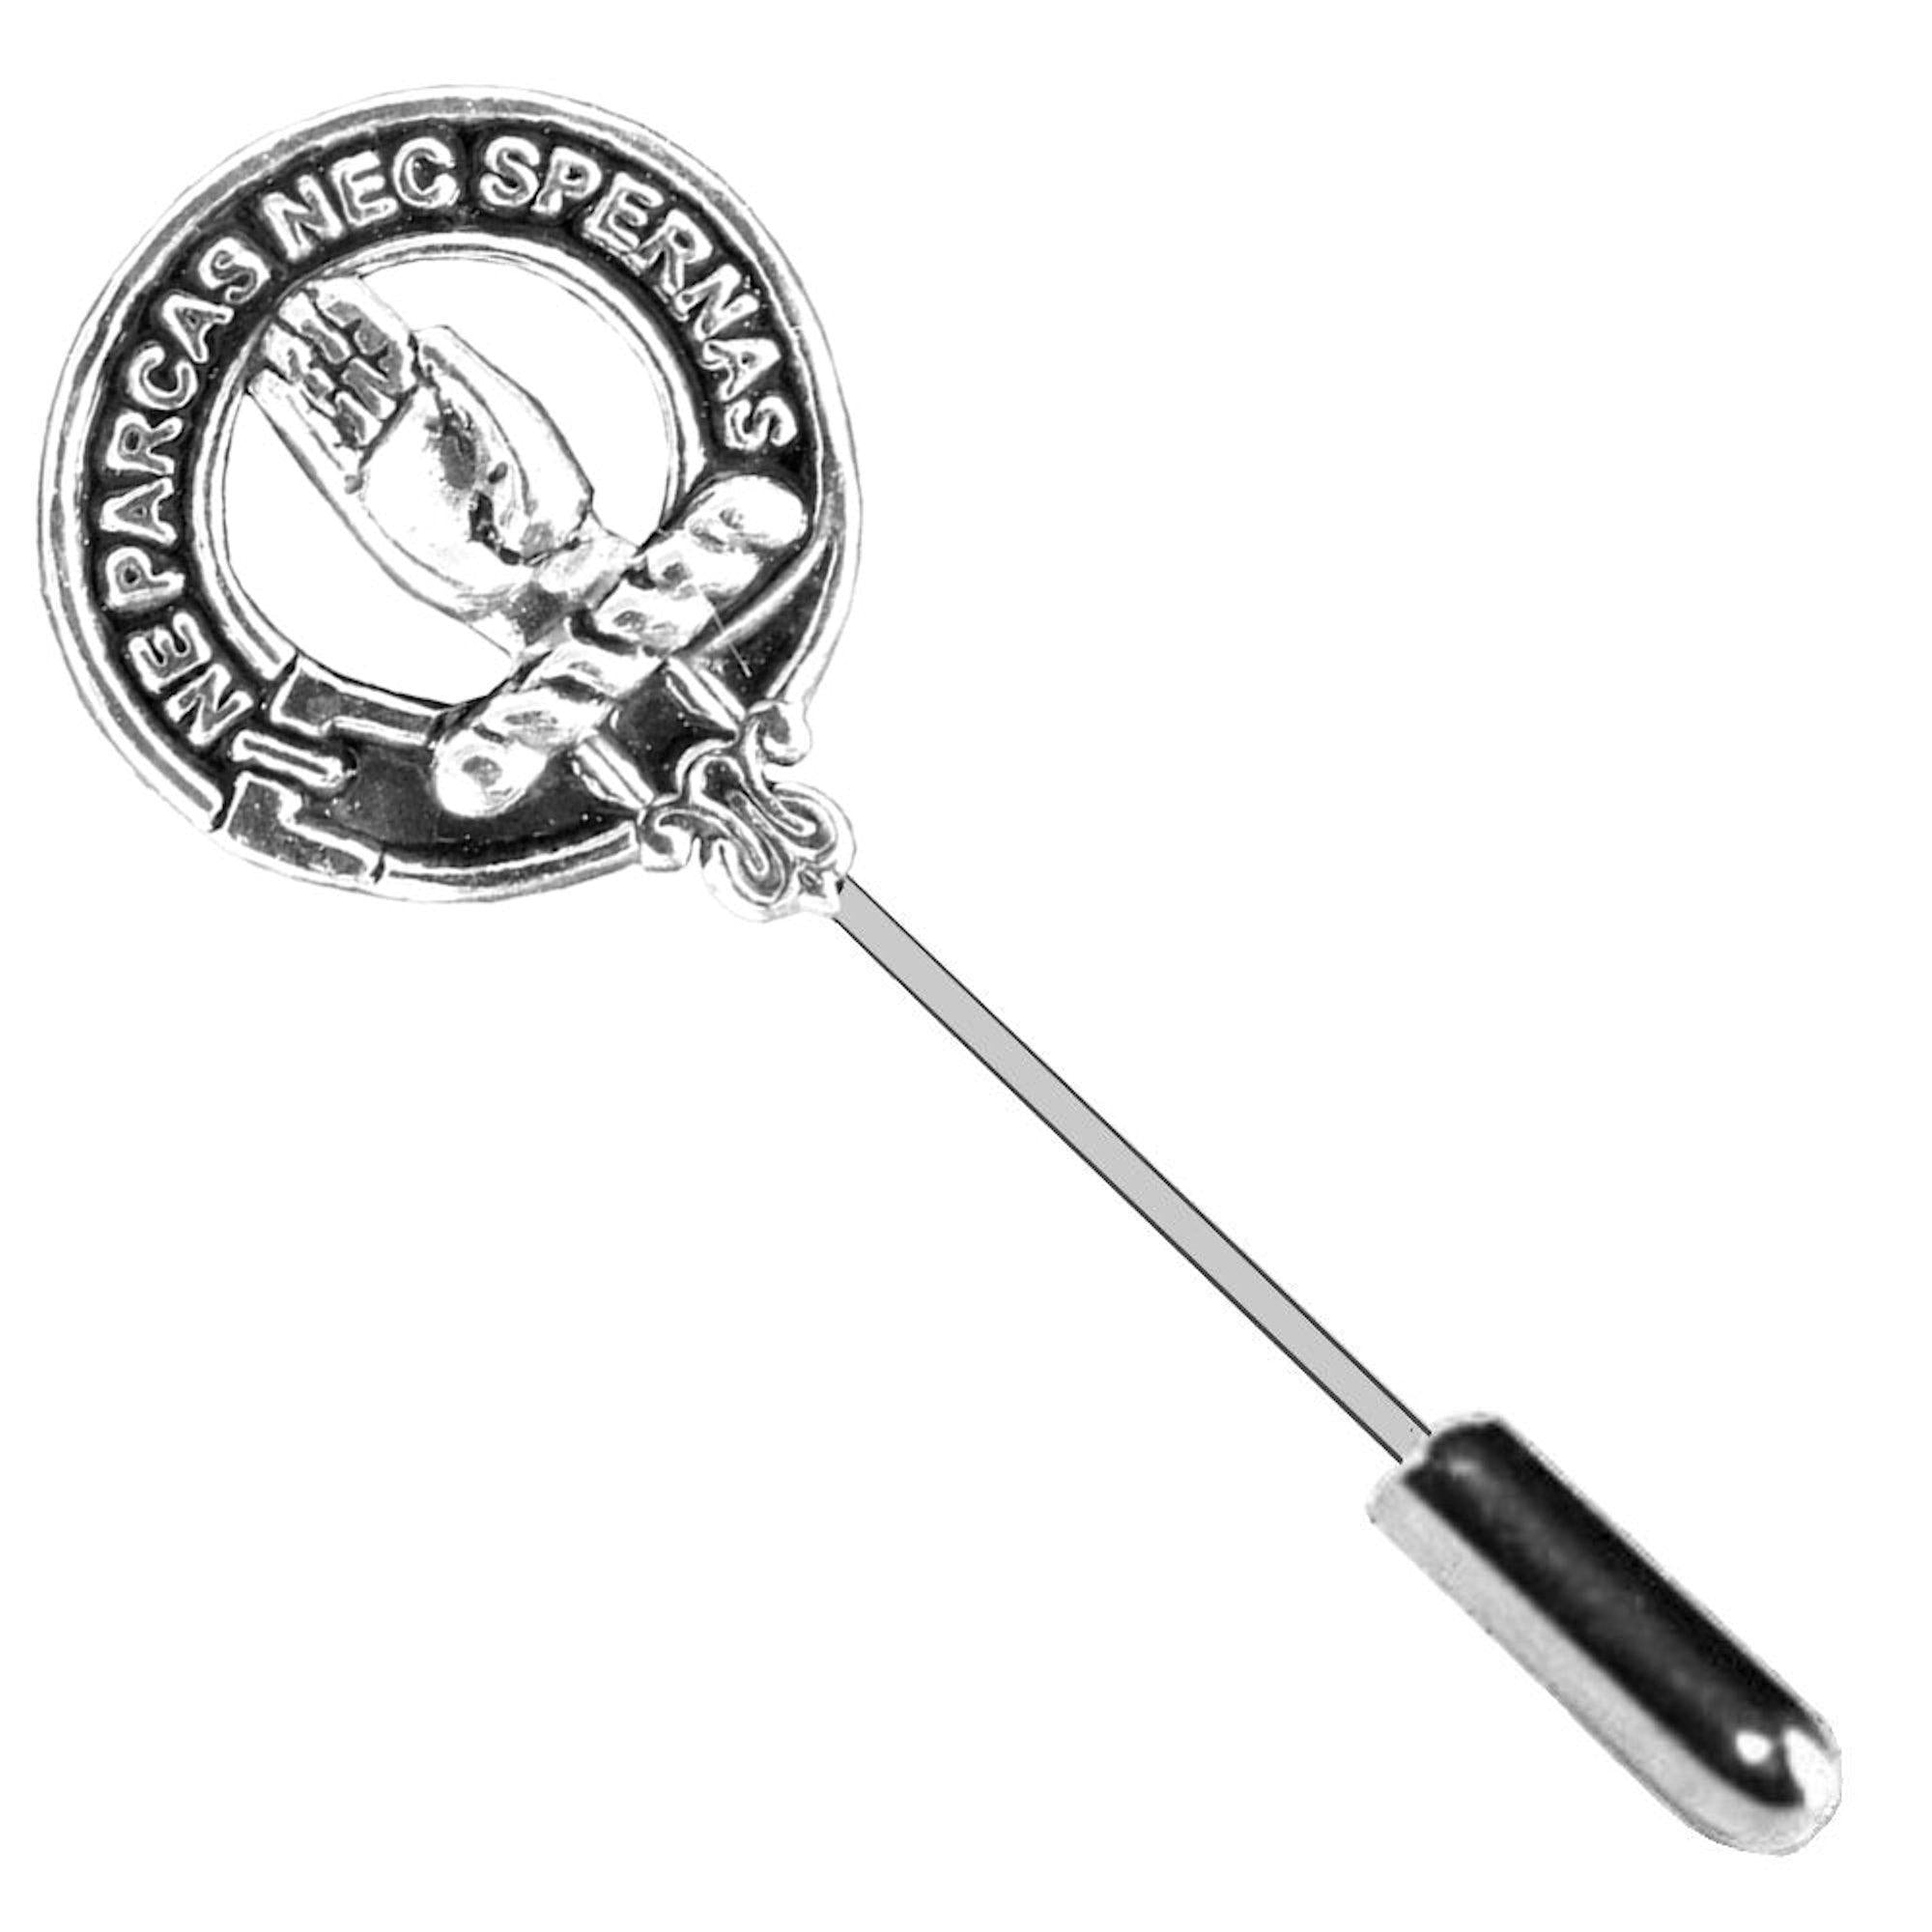 Lamont Clan Crest Stick or Cravat pin, Sterling Silver